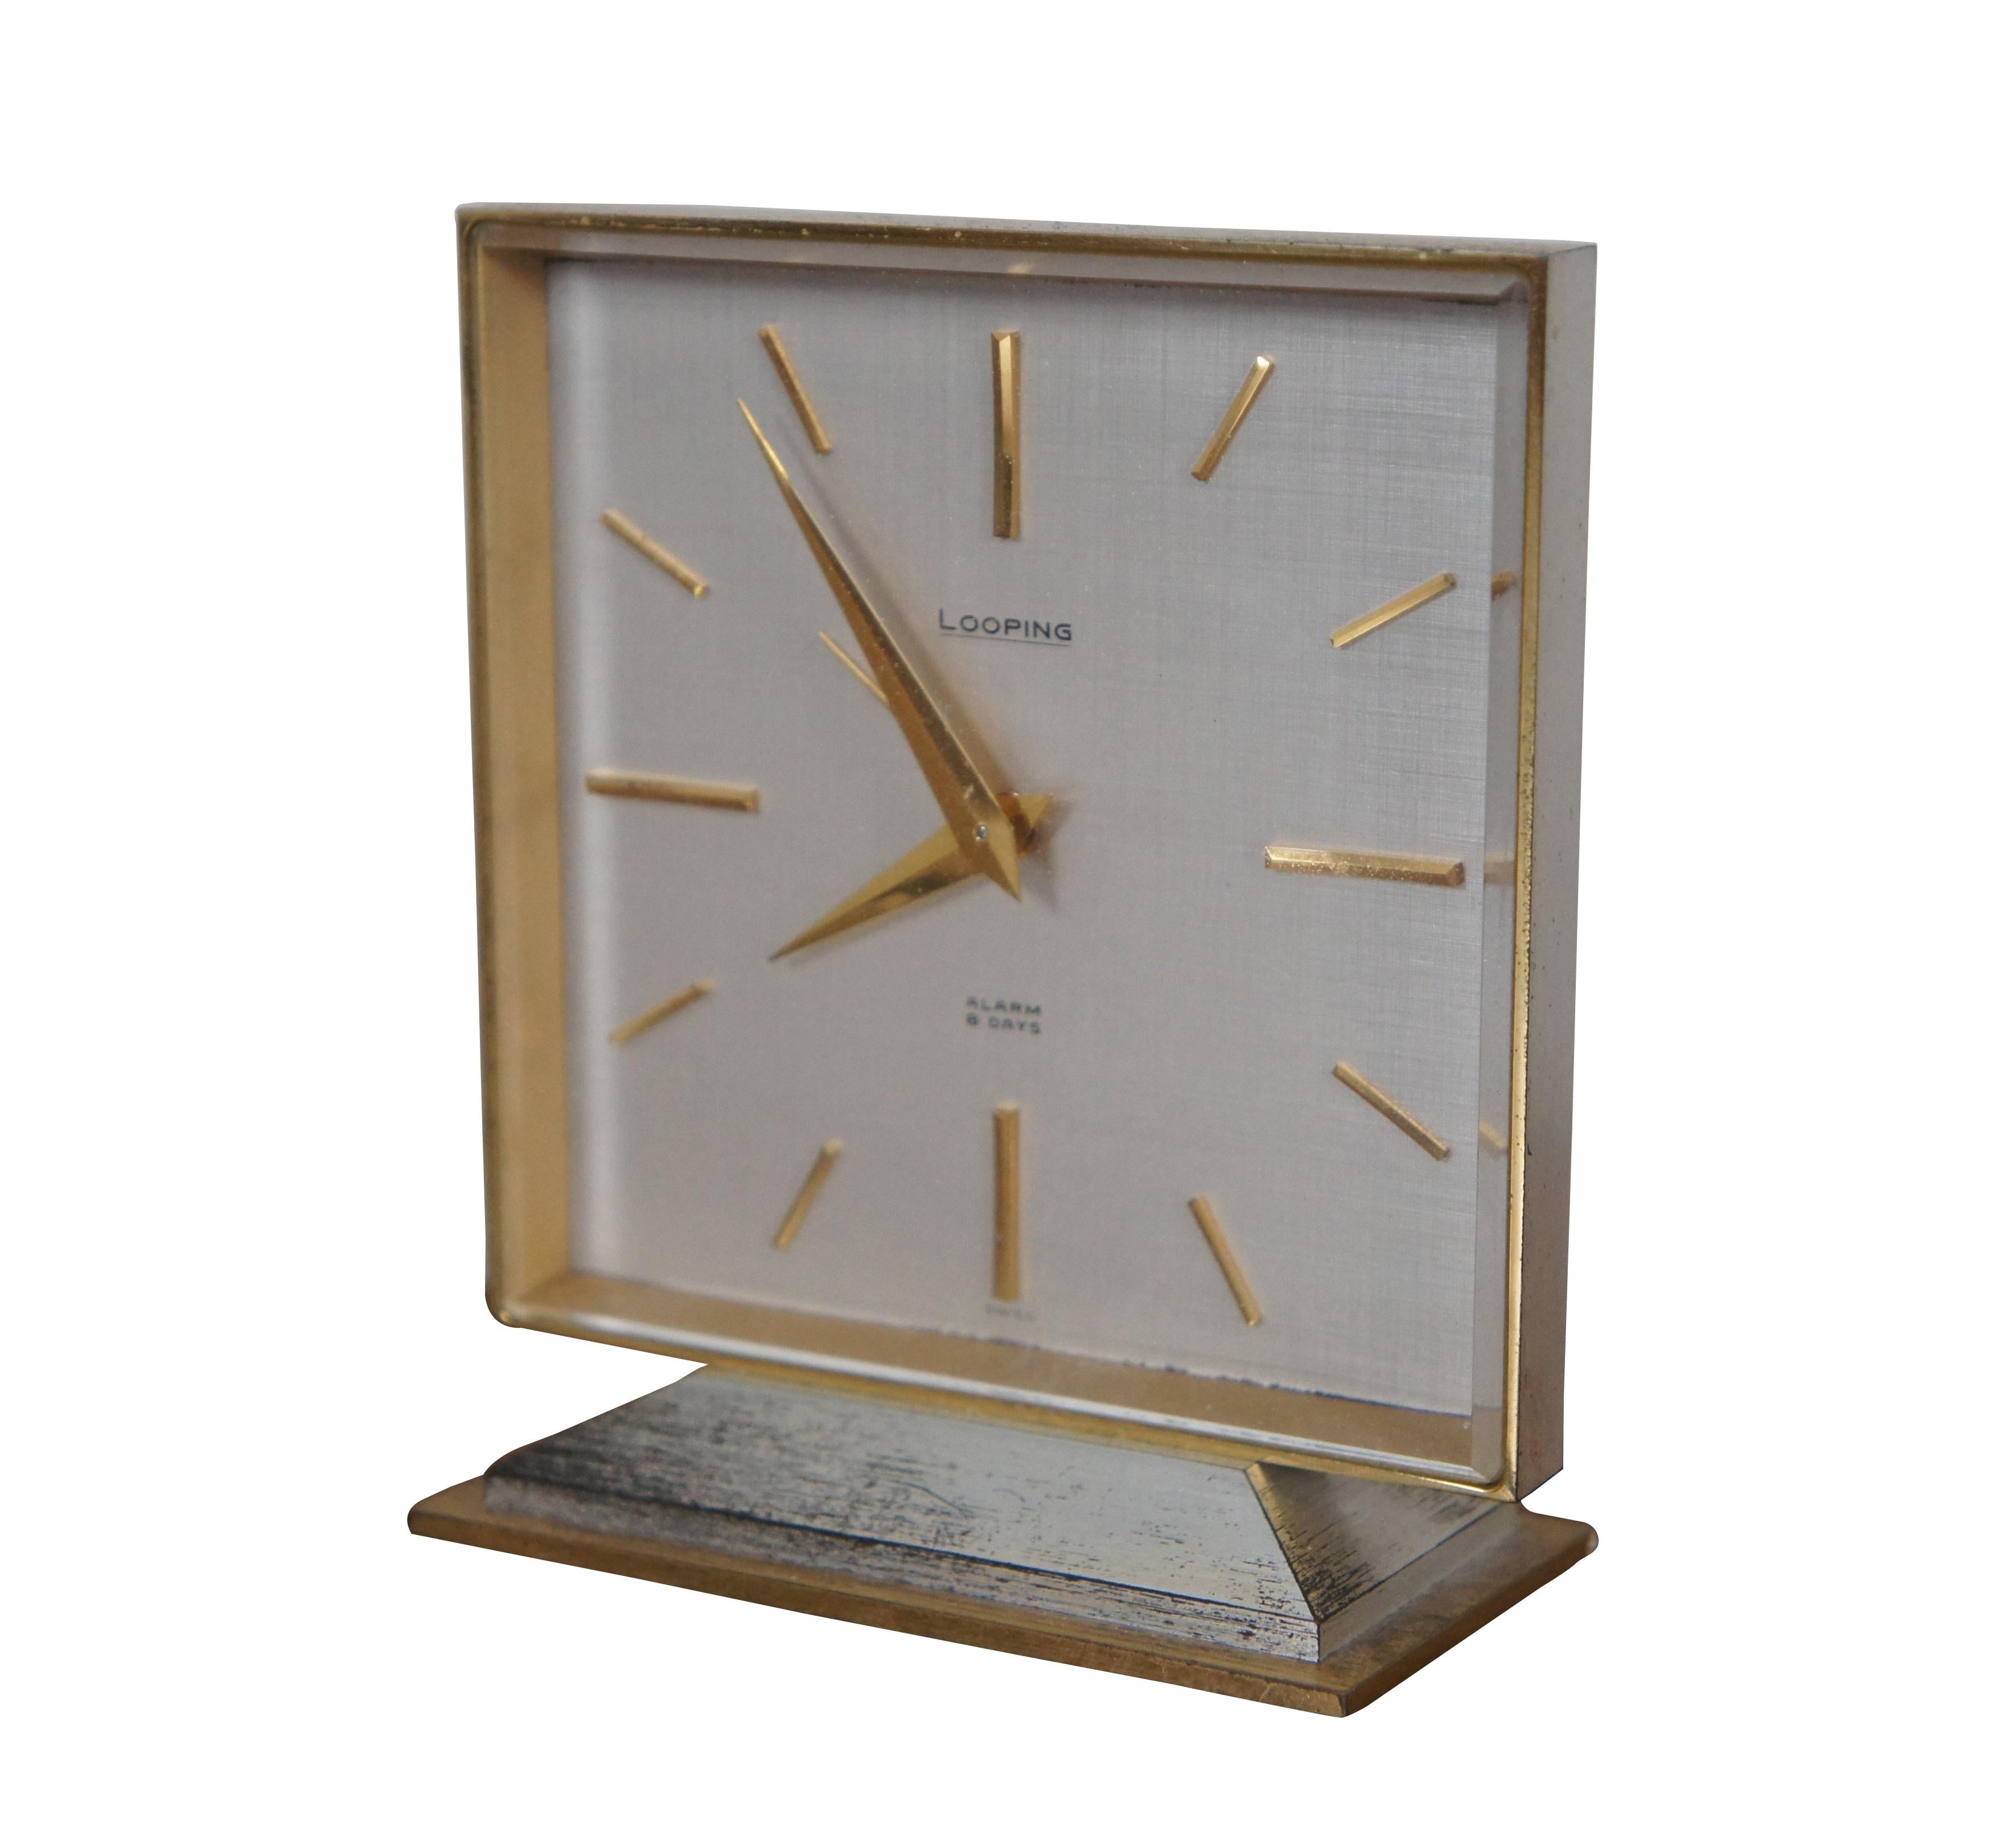 Mid century Looping Swiss 8 day alarm clock featuring 7 jewel movement and gilded brass case with glass.  Circa 1950s.

